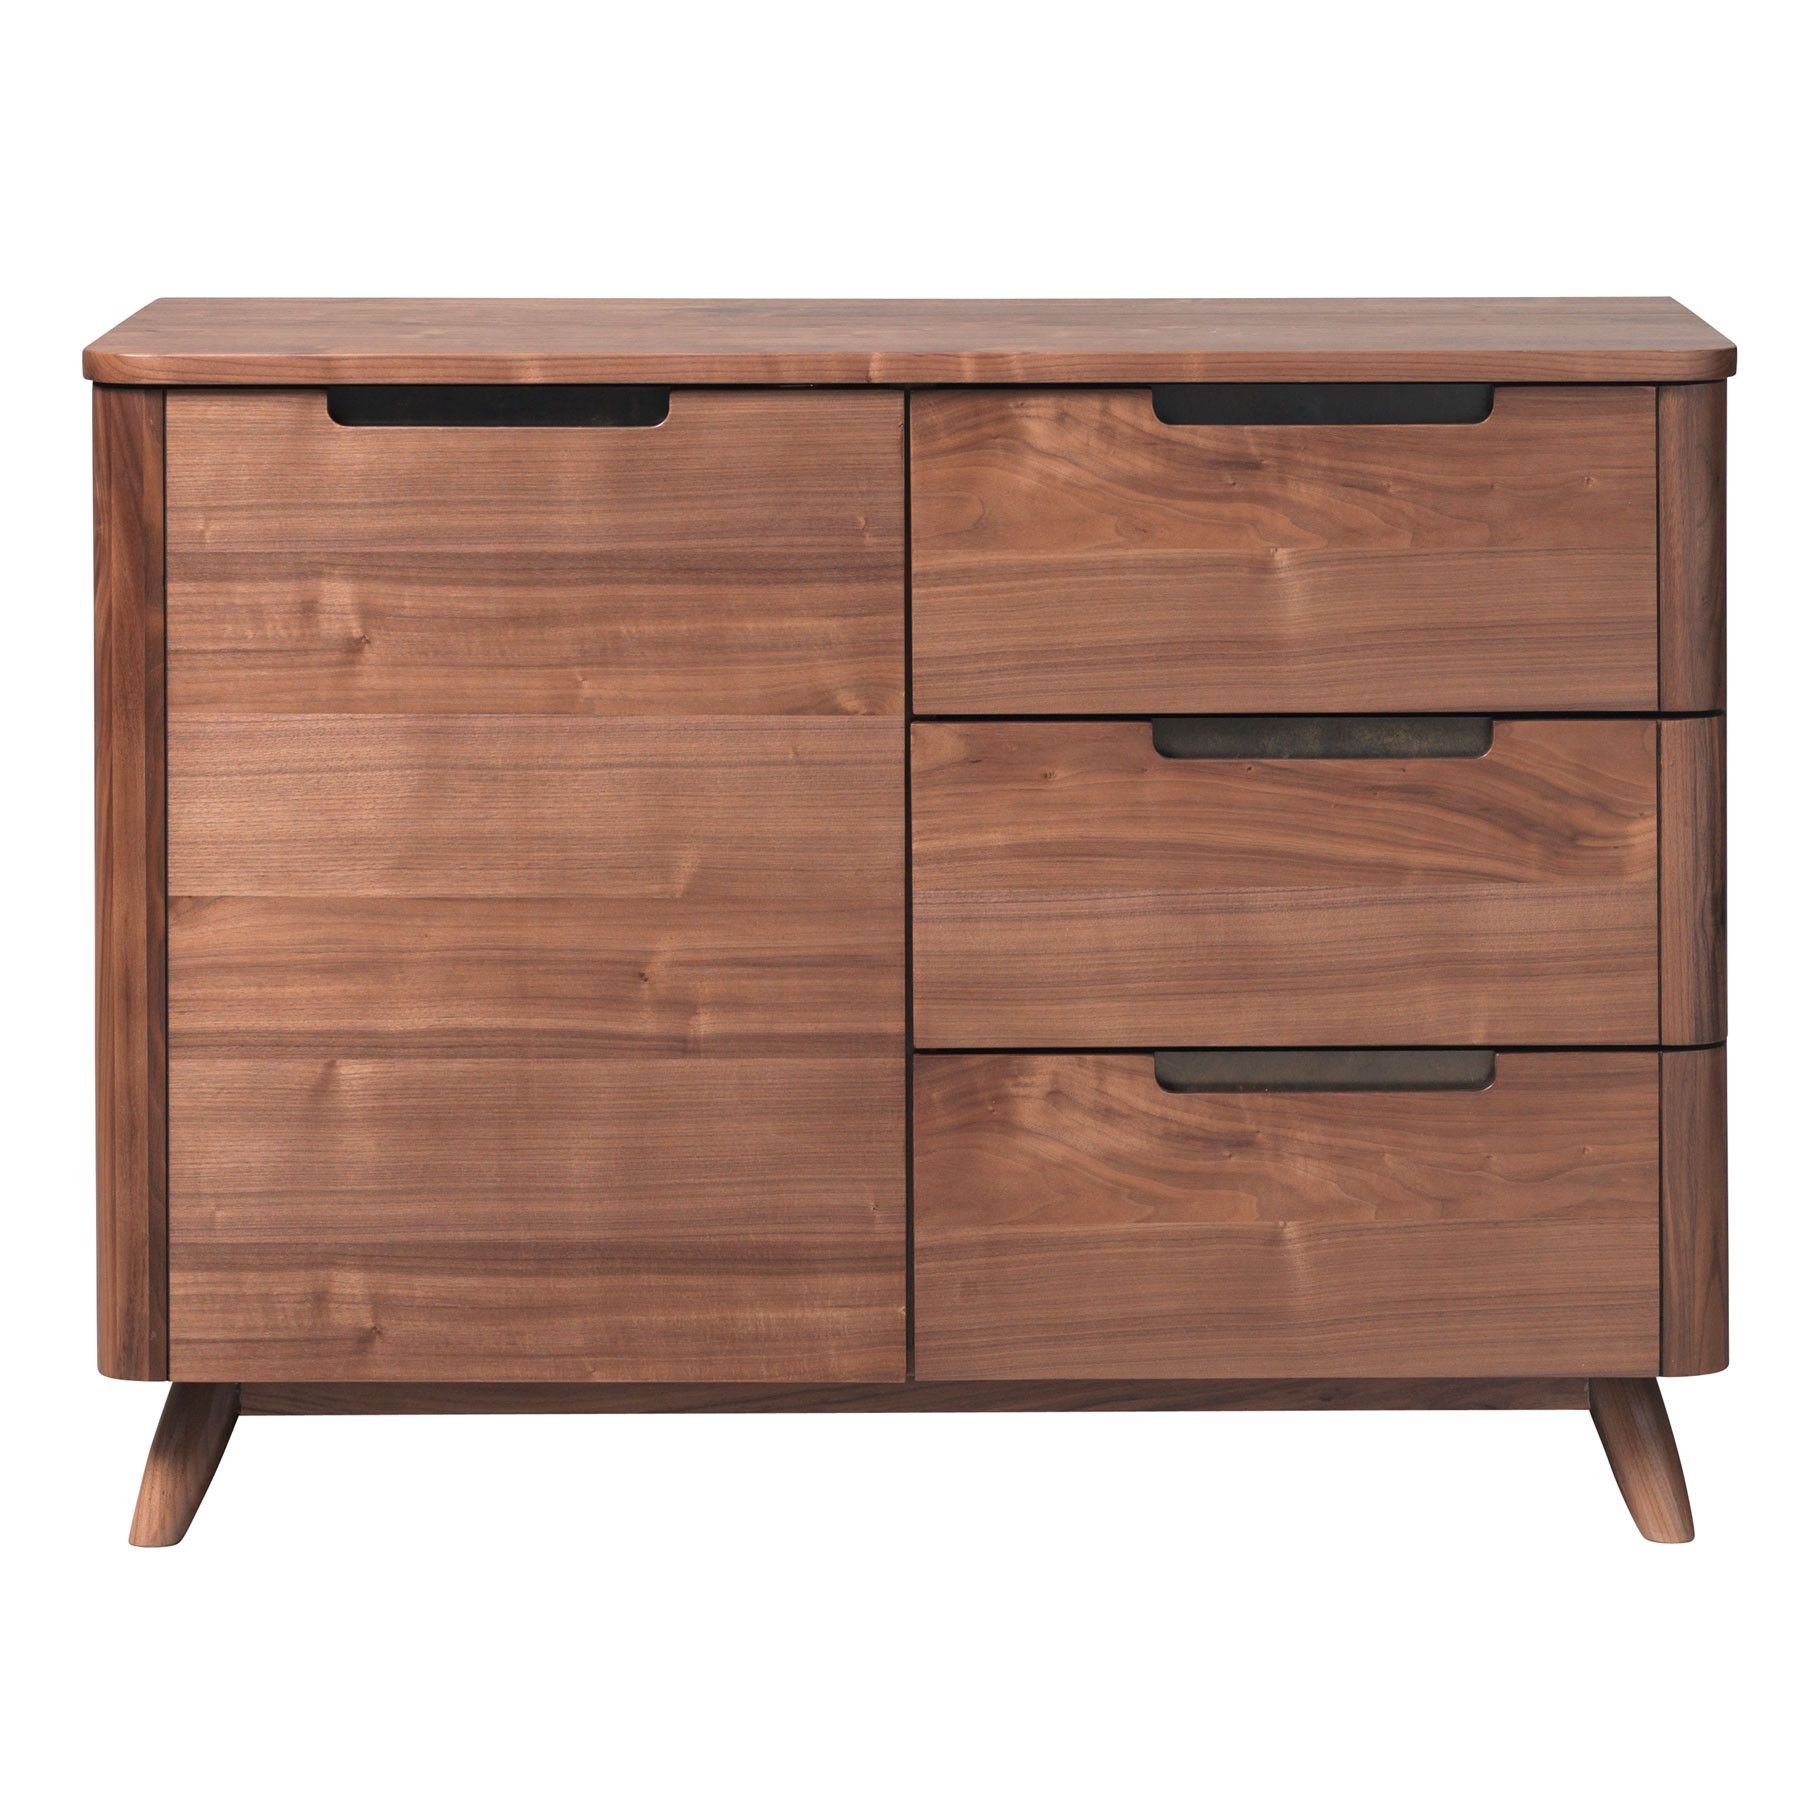 Loft Small Walnut Sideboard Intended For Walnut Small Sideboards (View 5 of 30)